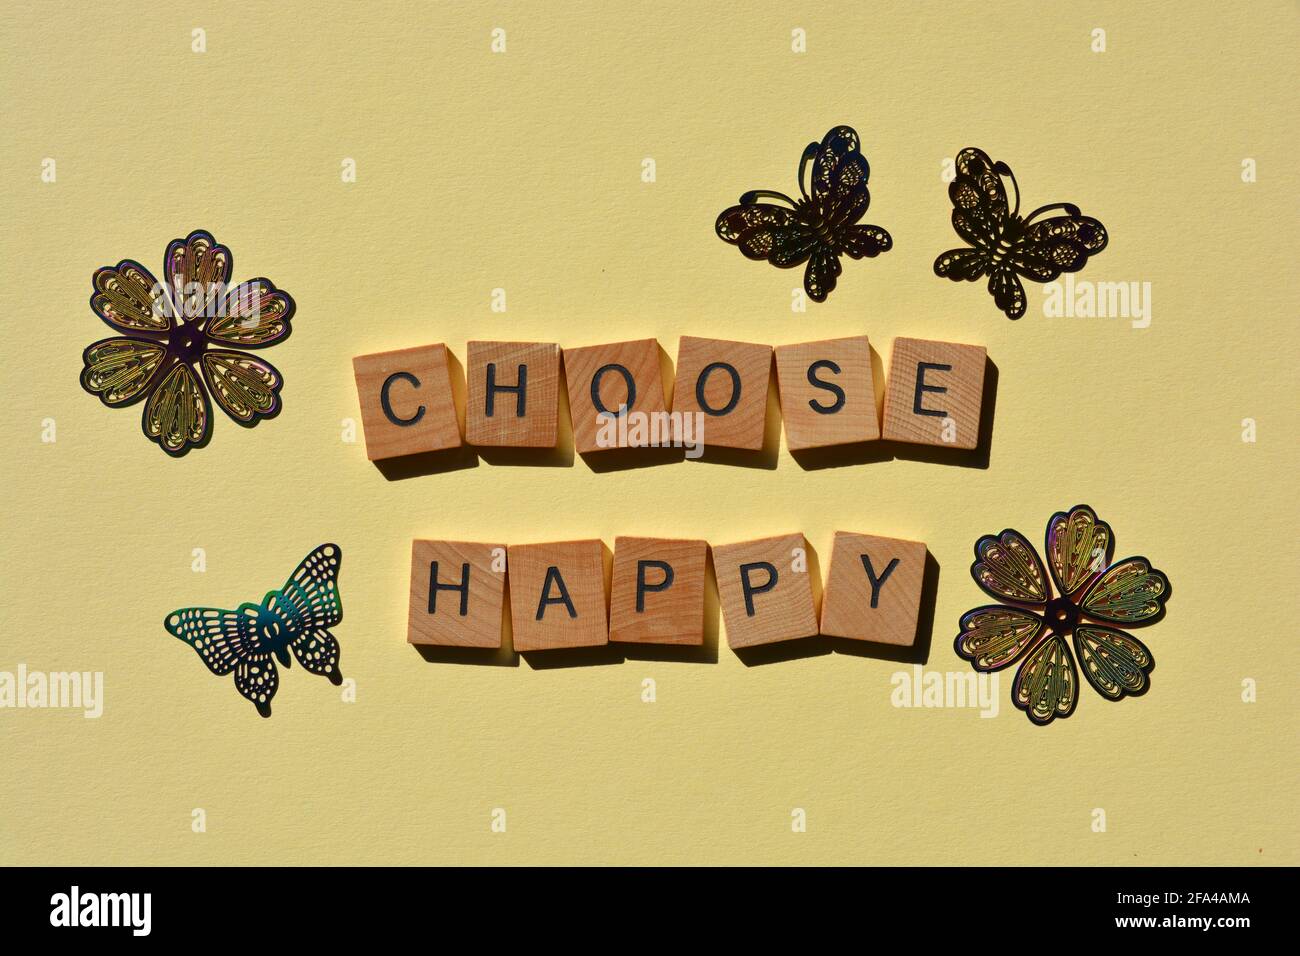 Today Choose Happiness Joy Health Stock Image  Image of wooden choose  131439979